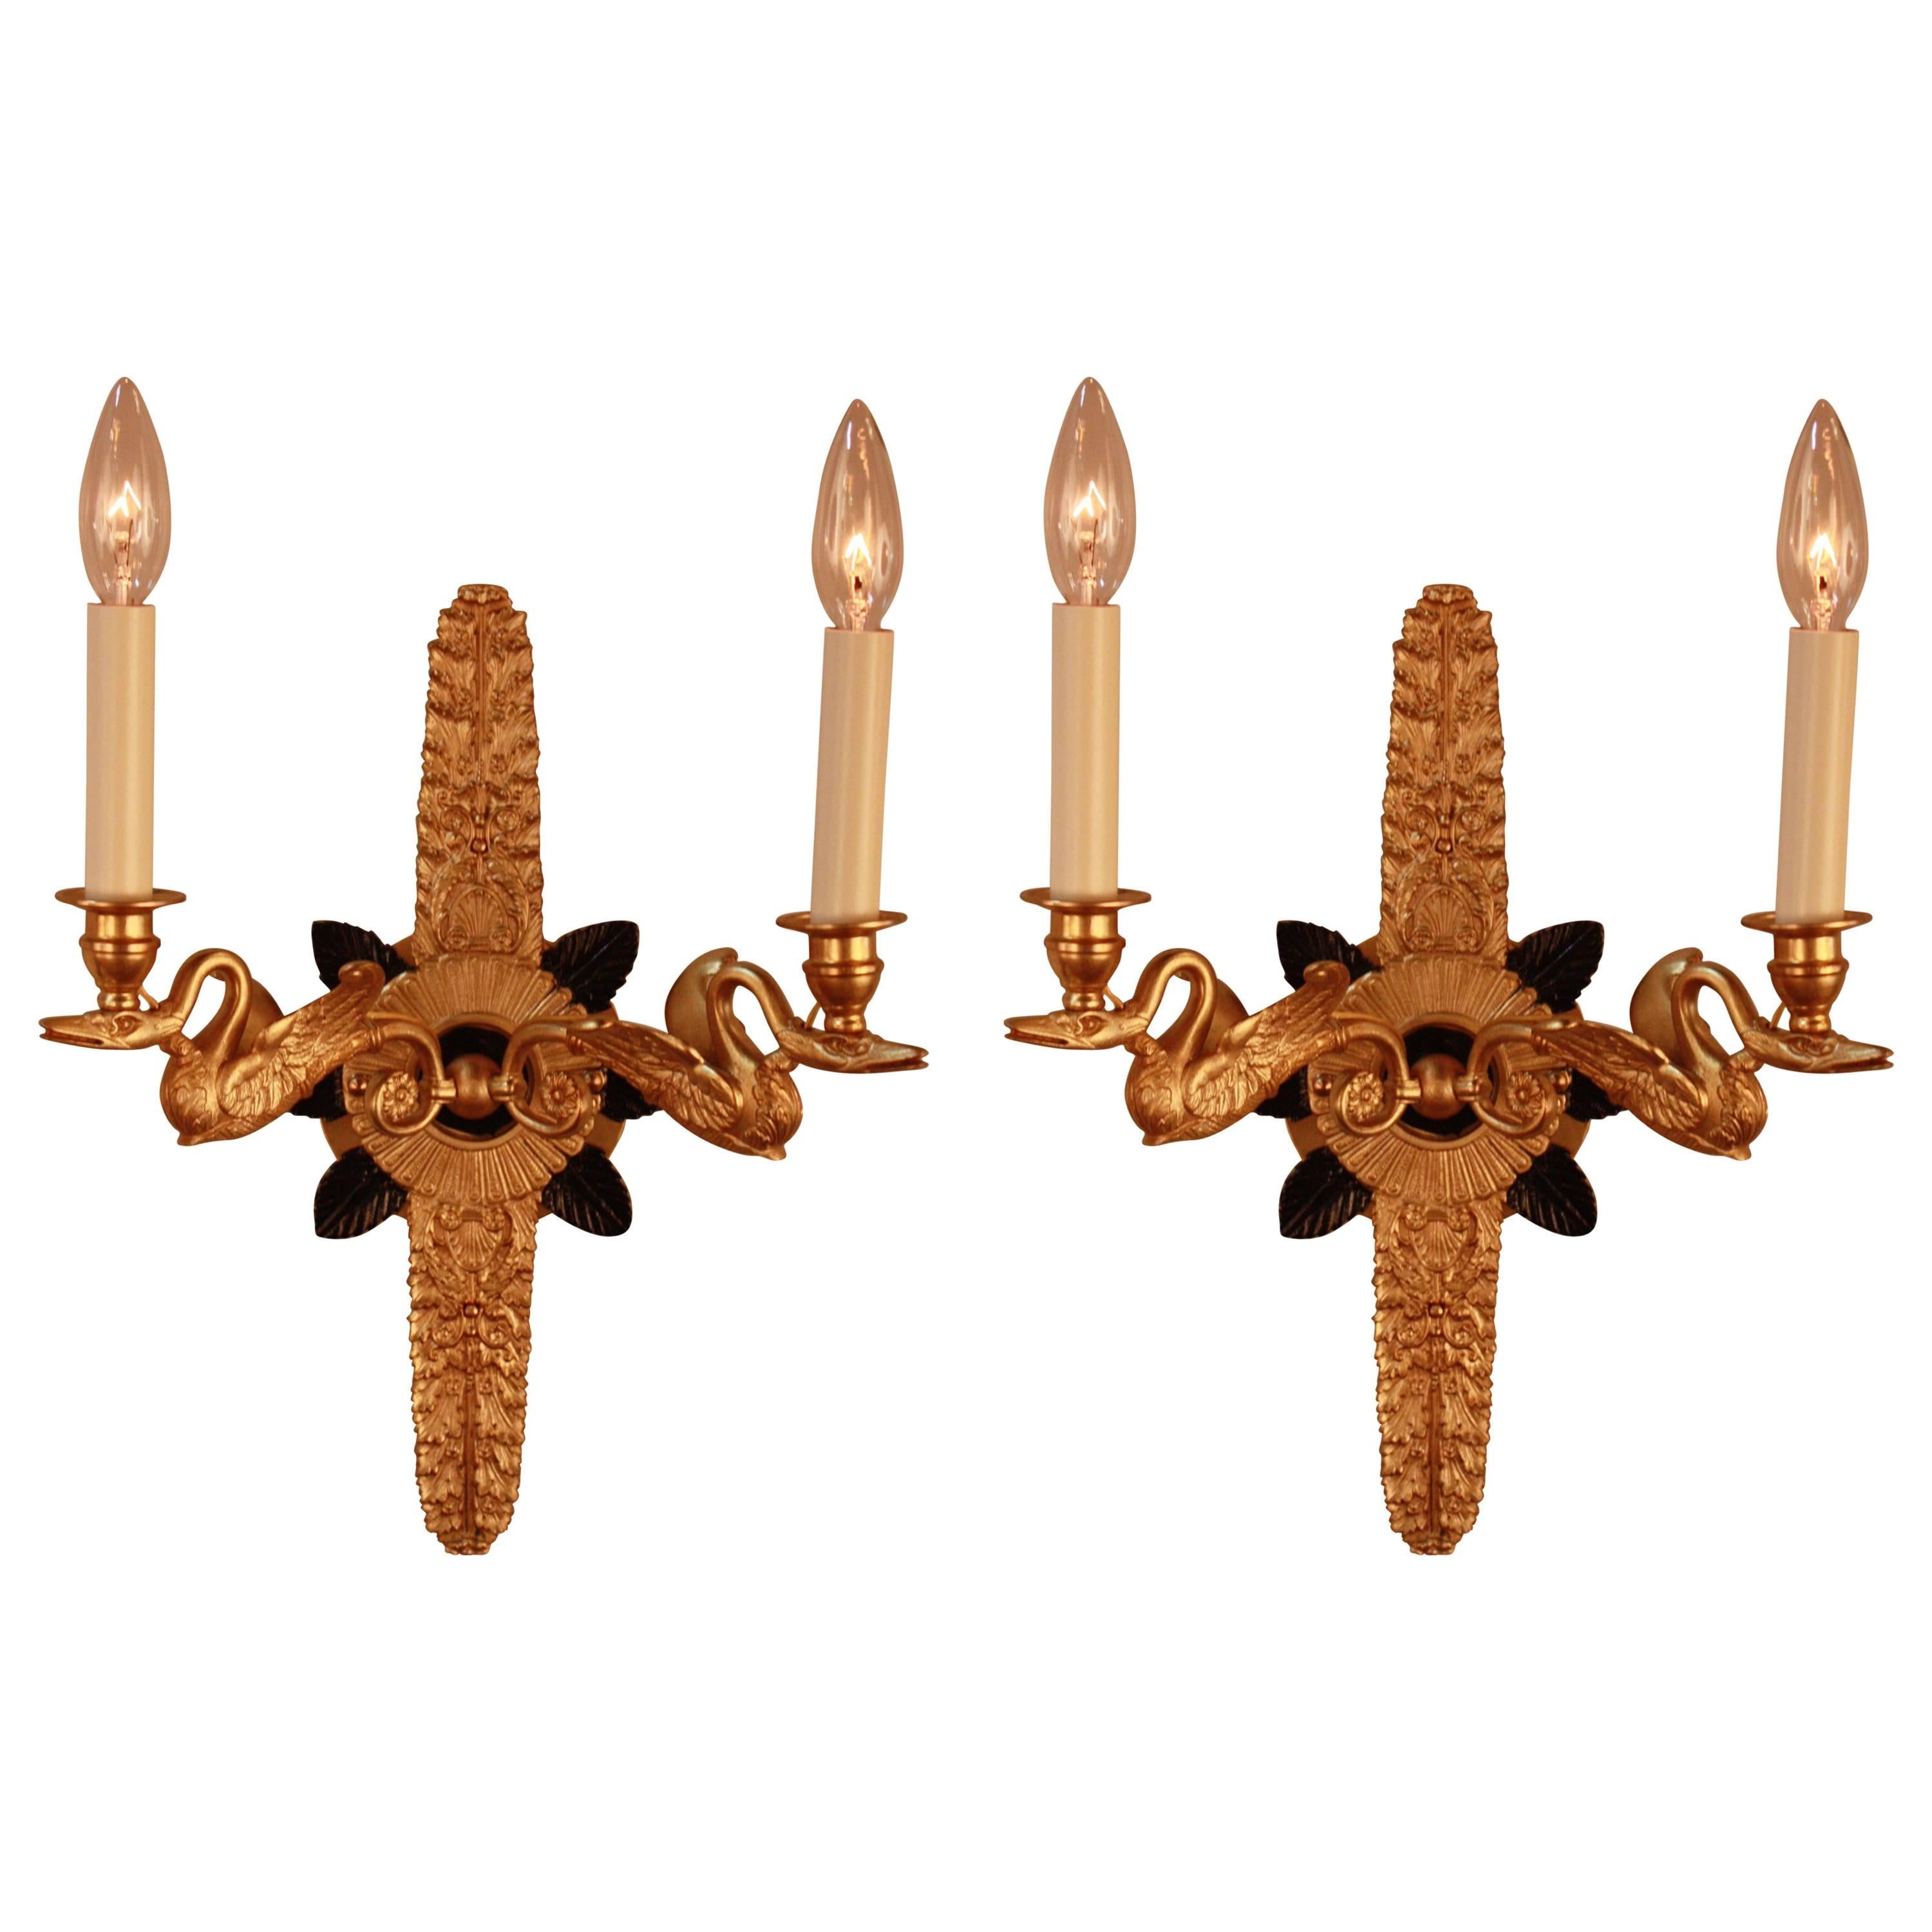 Pair of French Empire Style Bronze Swan Wall Sconces